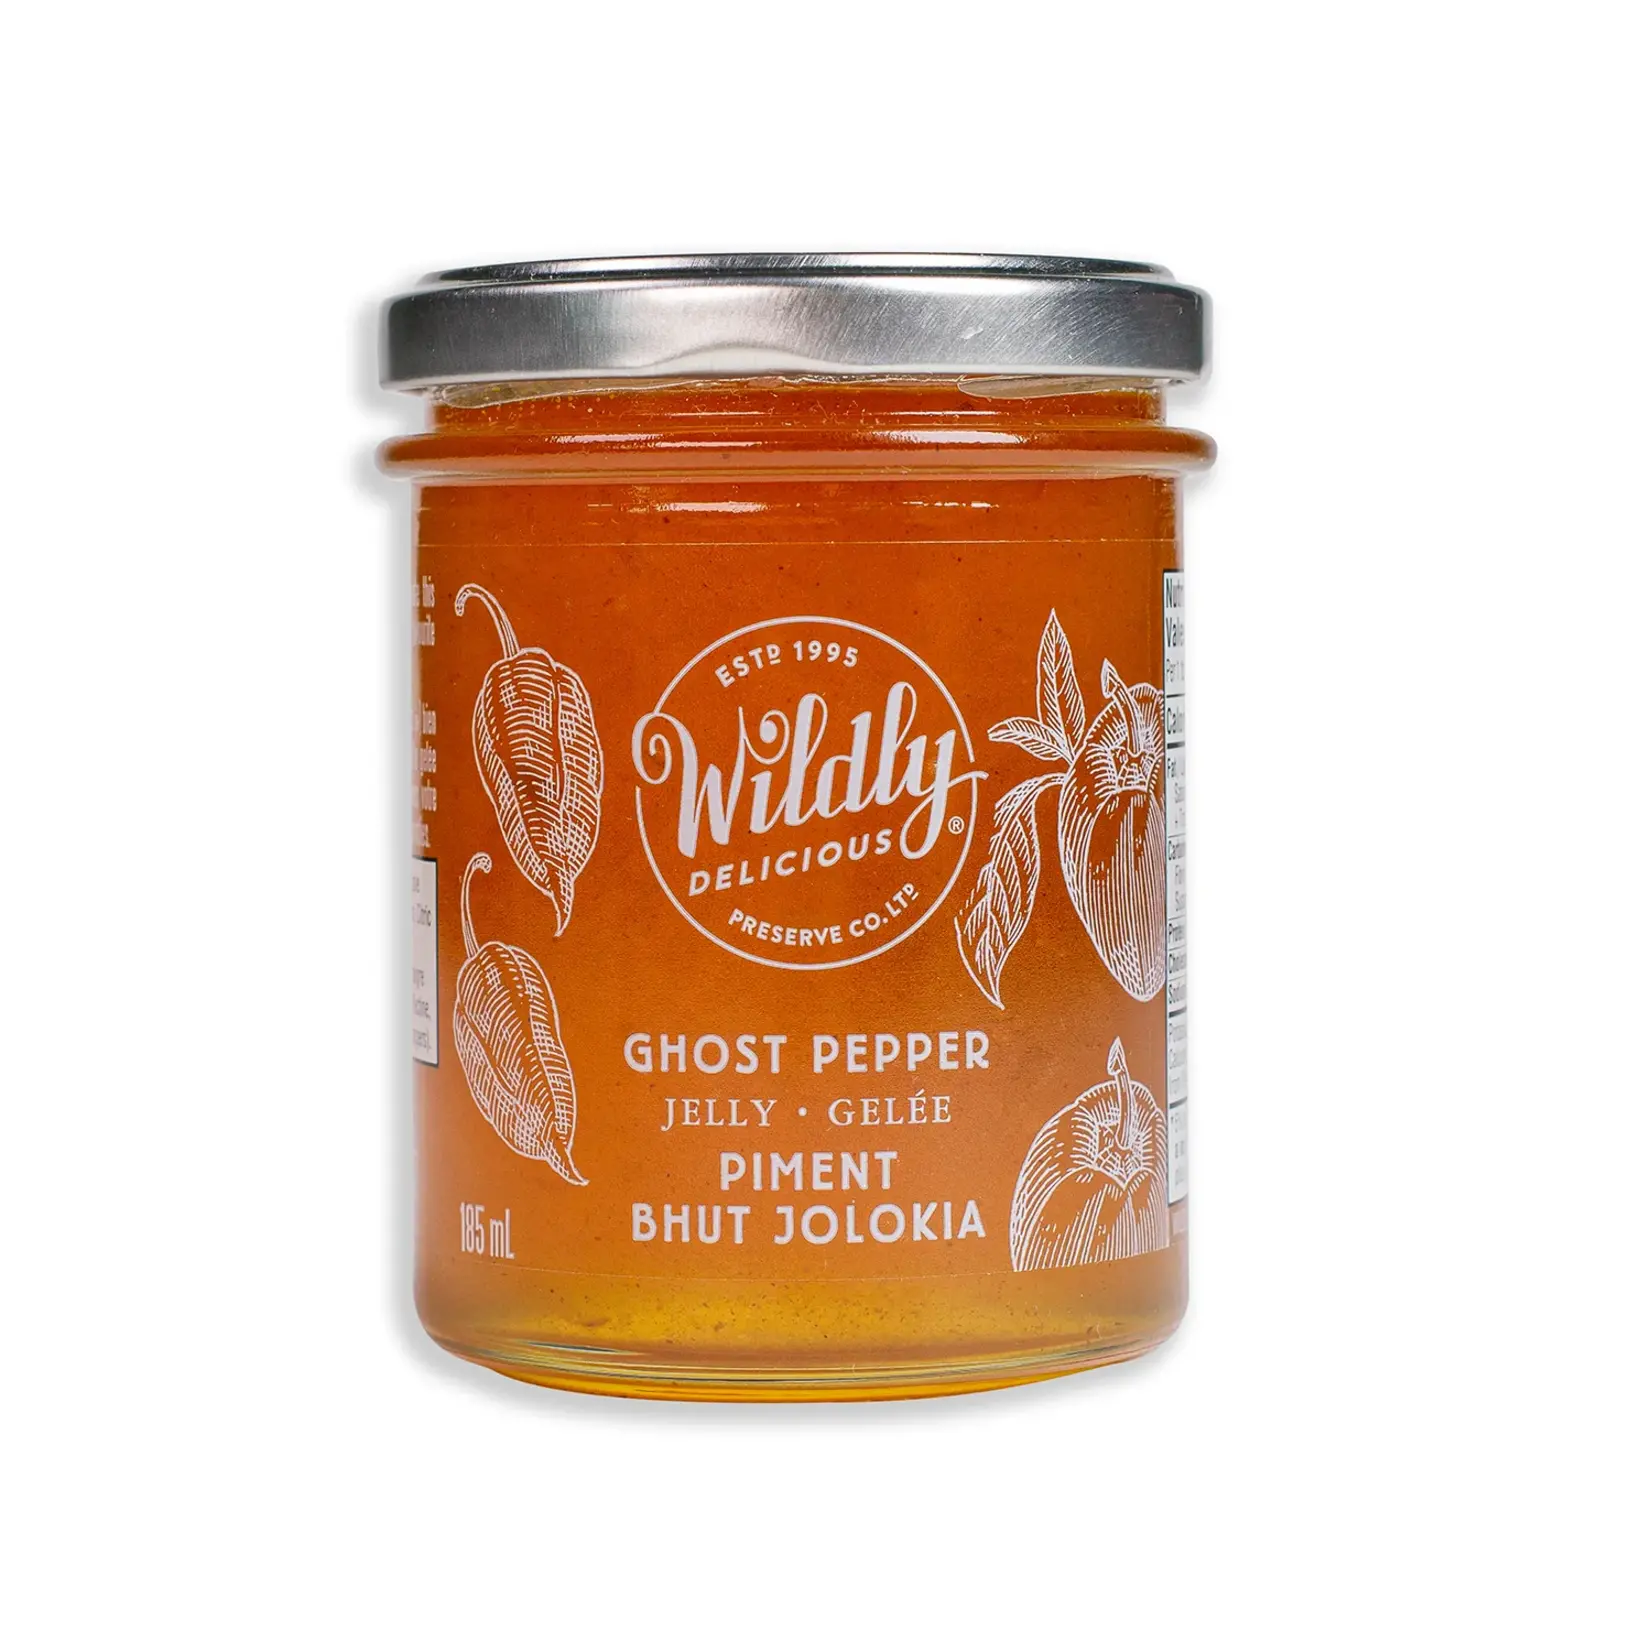 Wildly Delicious Ghost Pepper Jelly